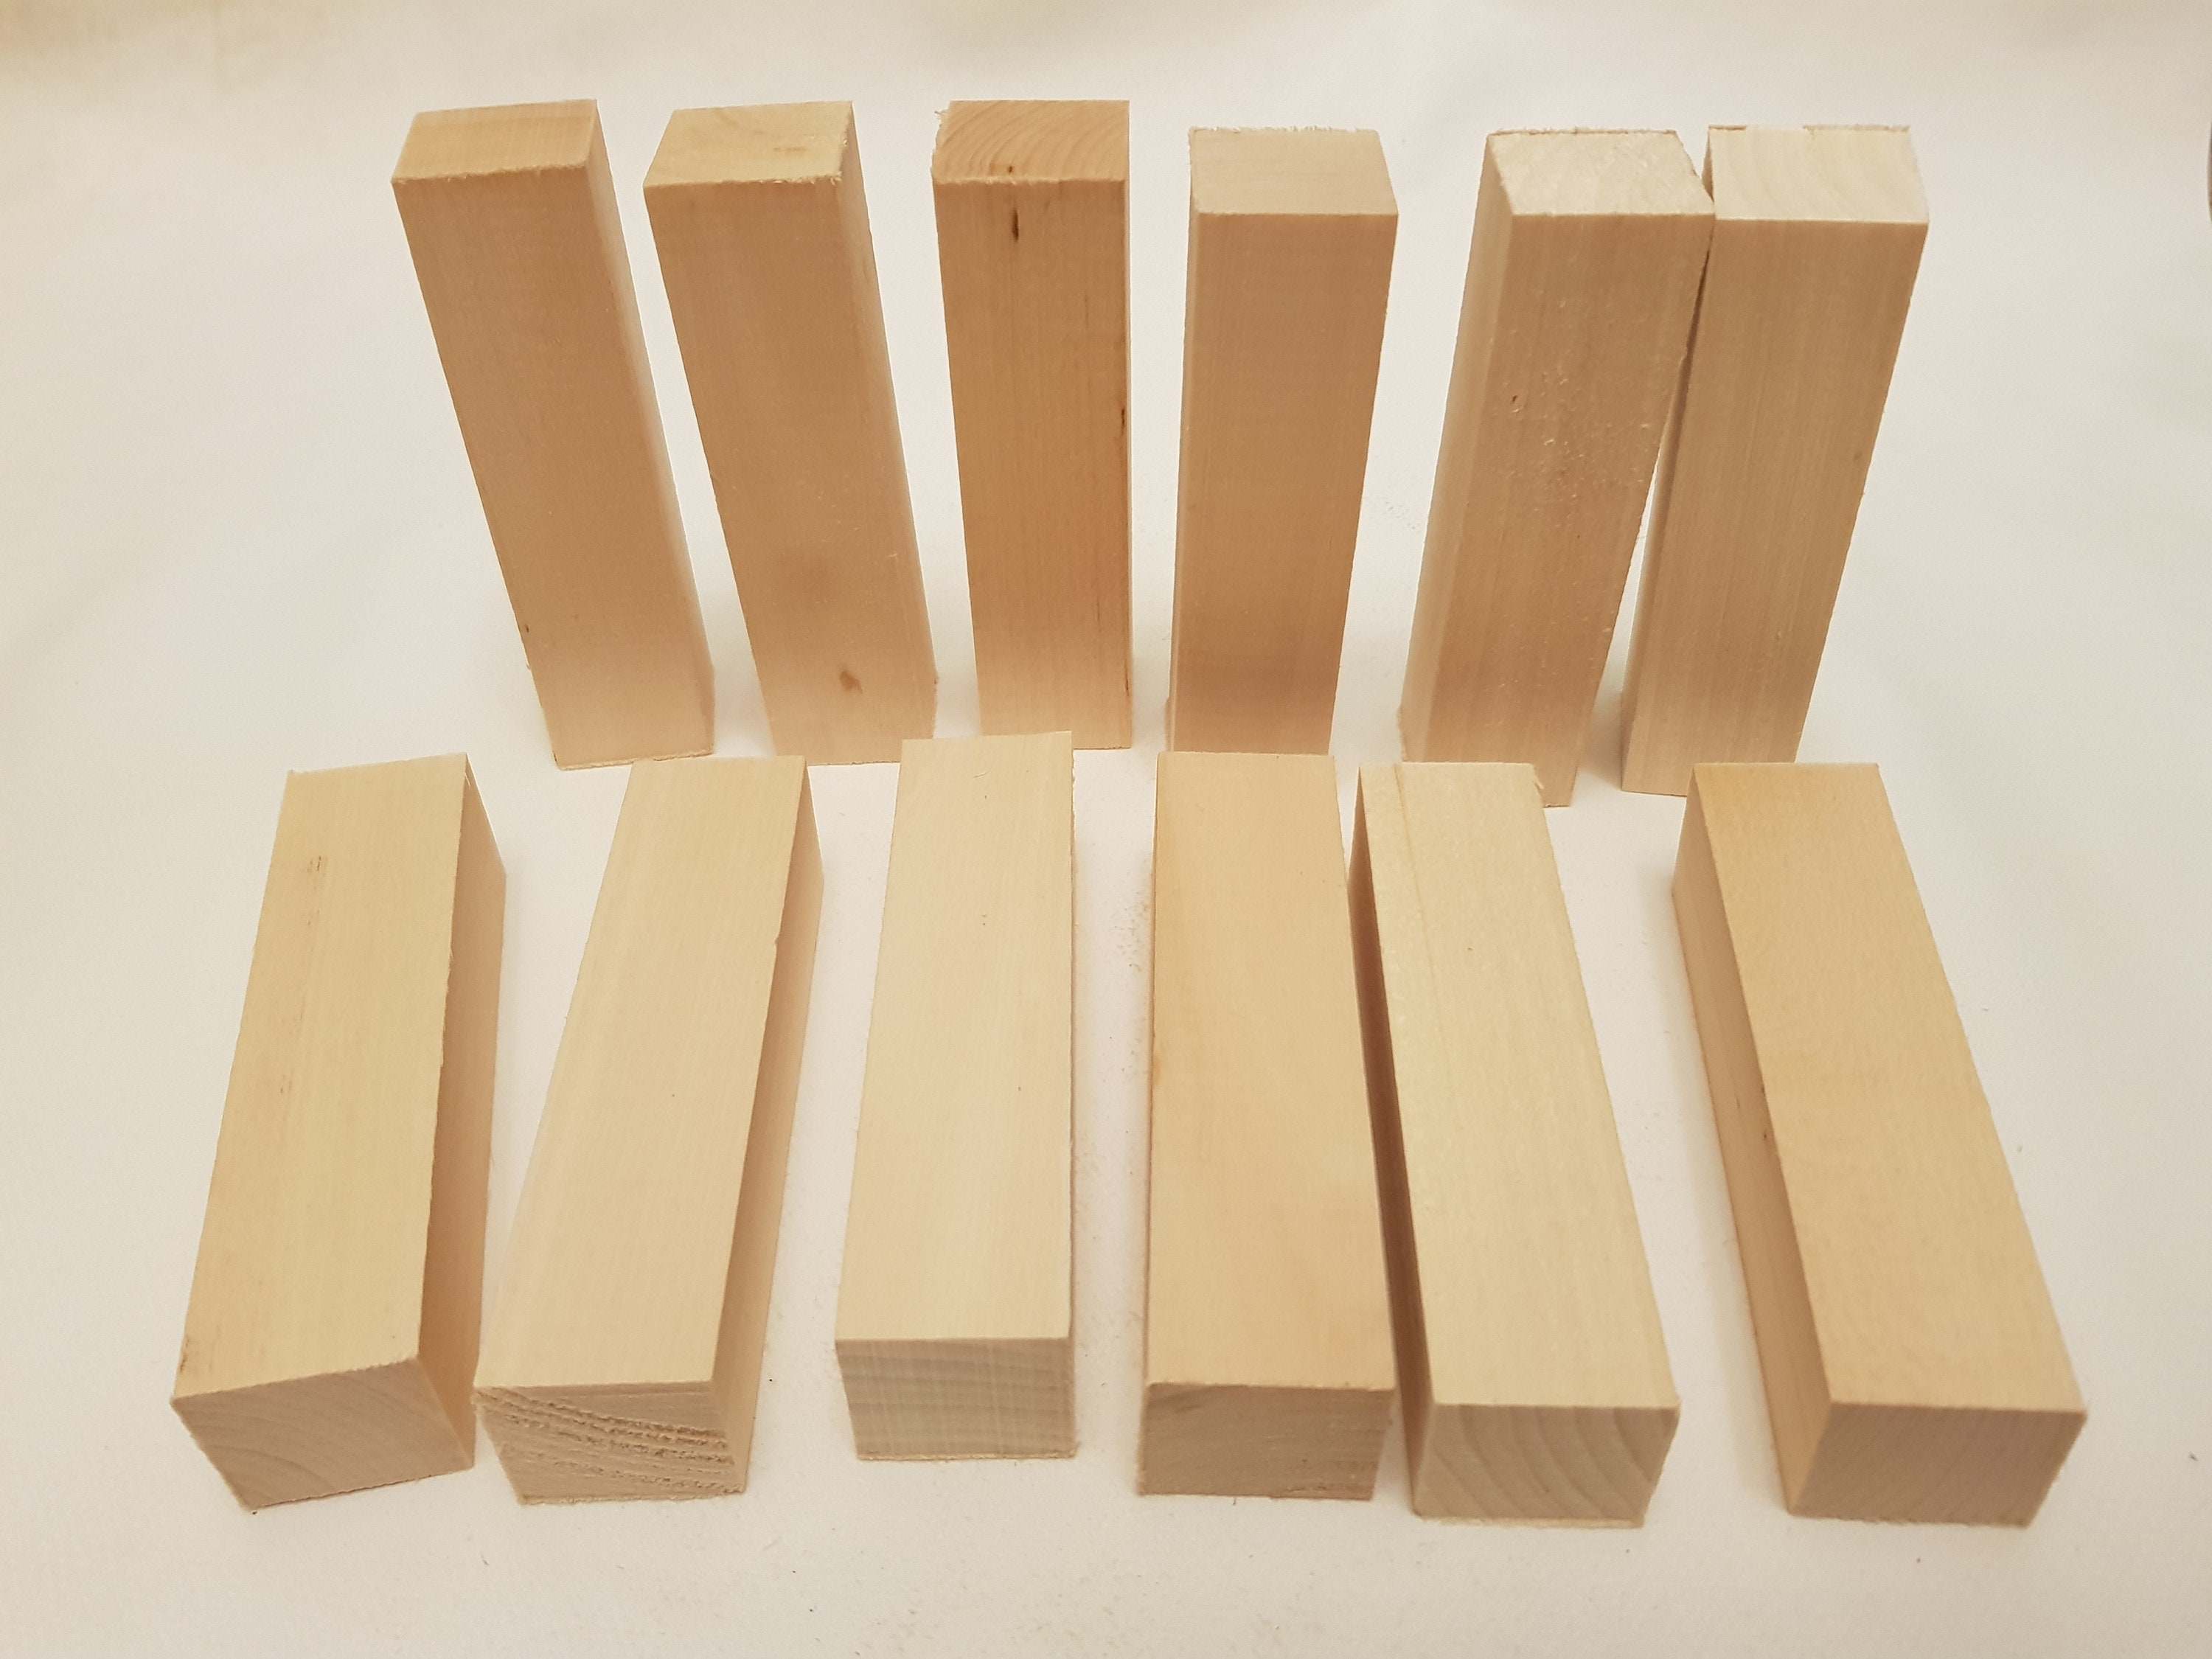 Lime Wood 12 Piece Soft Lime Wood Hand Carving Blanks Blocks